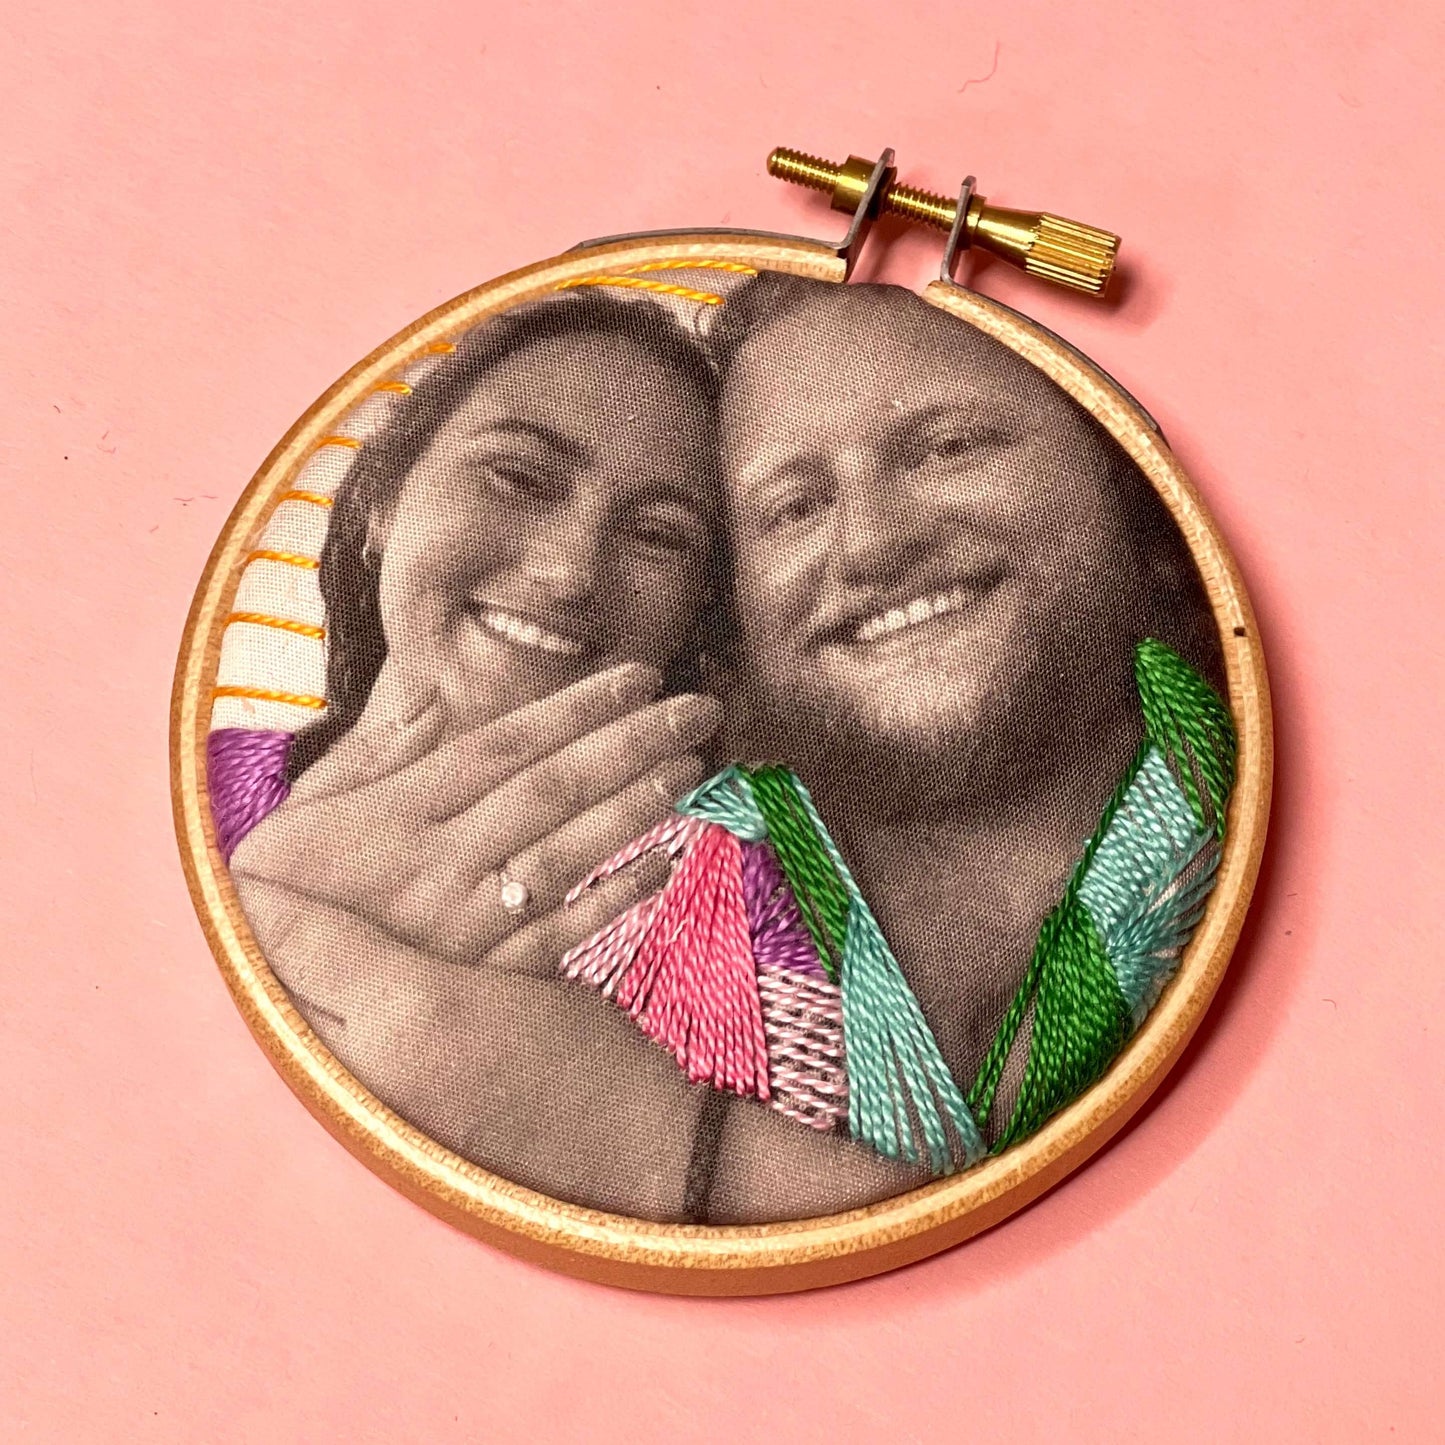 Embroidered Photo Couple Gift